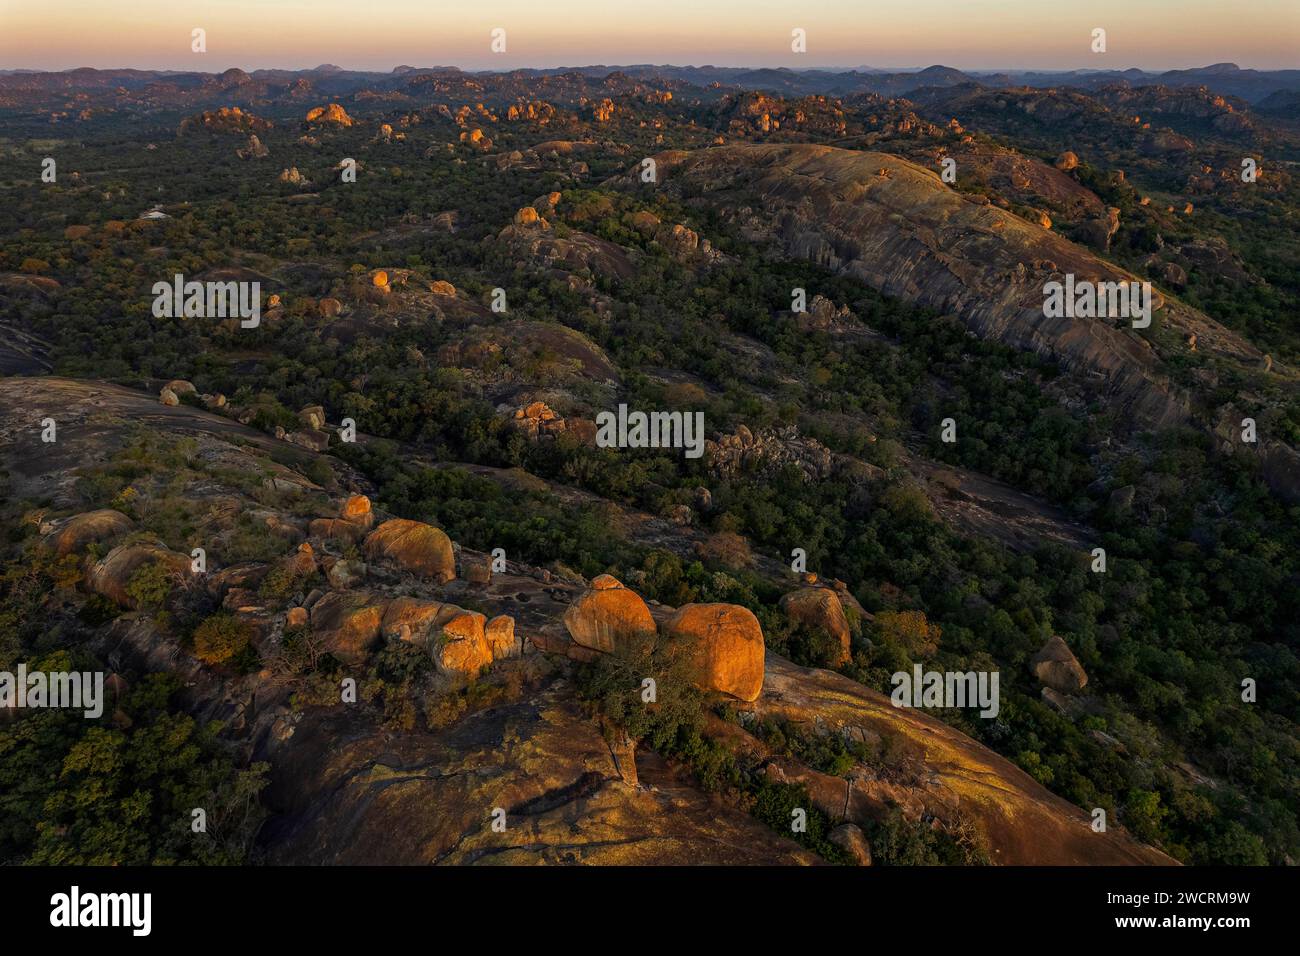 An aerial view of the unique landscape of the Matobo hills in Zimbabwe. Stock Photo